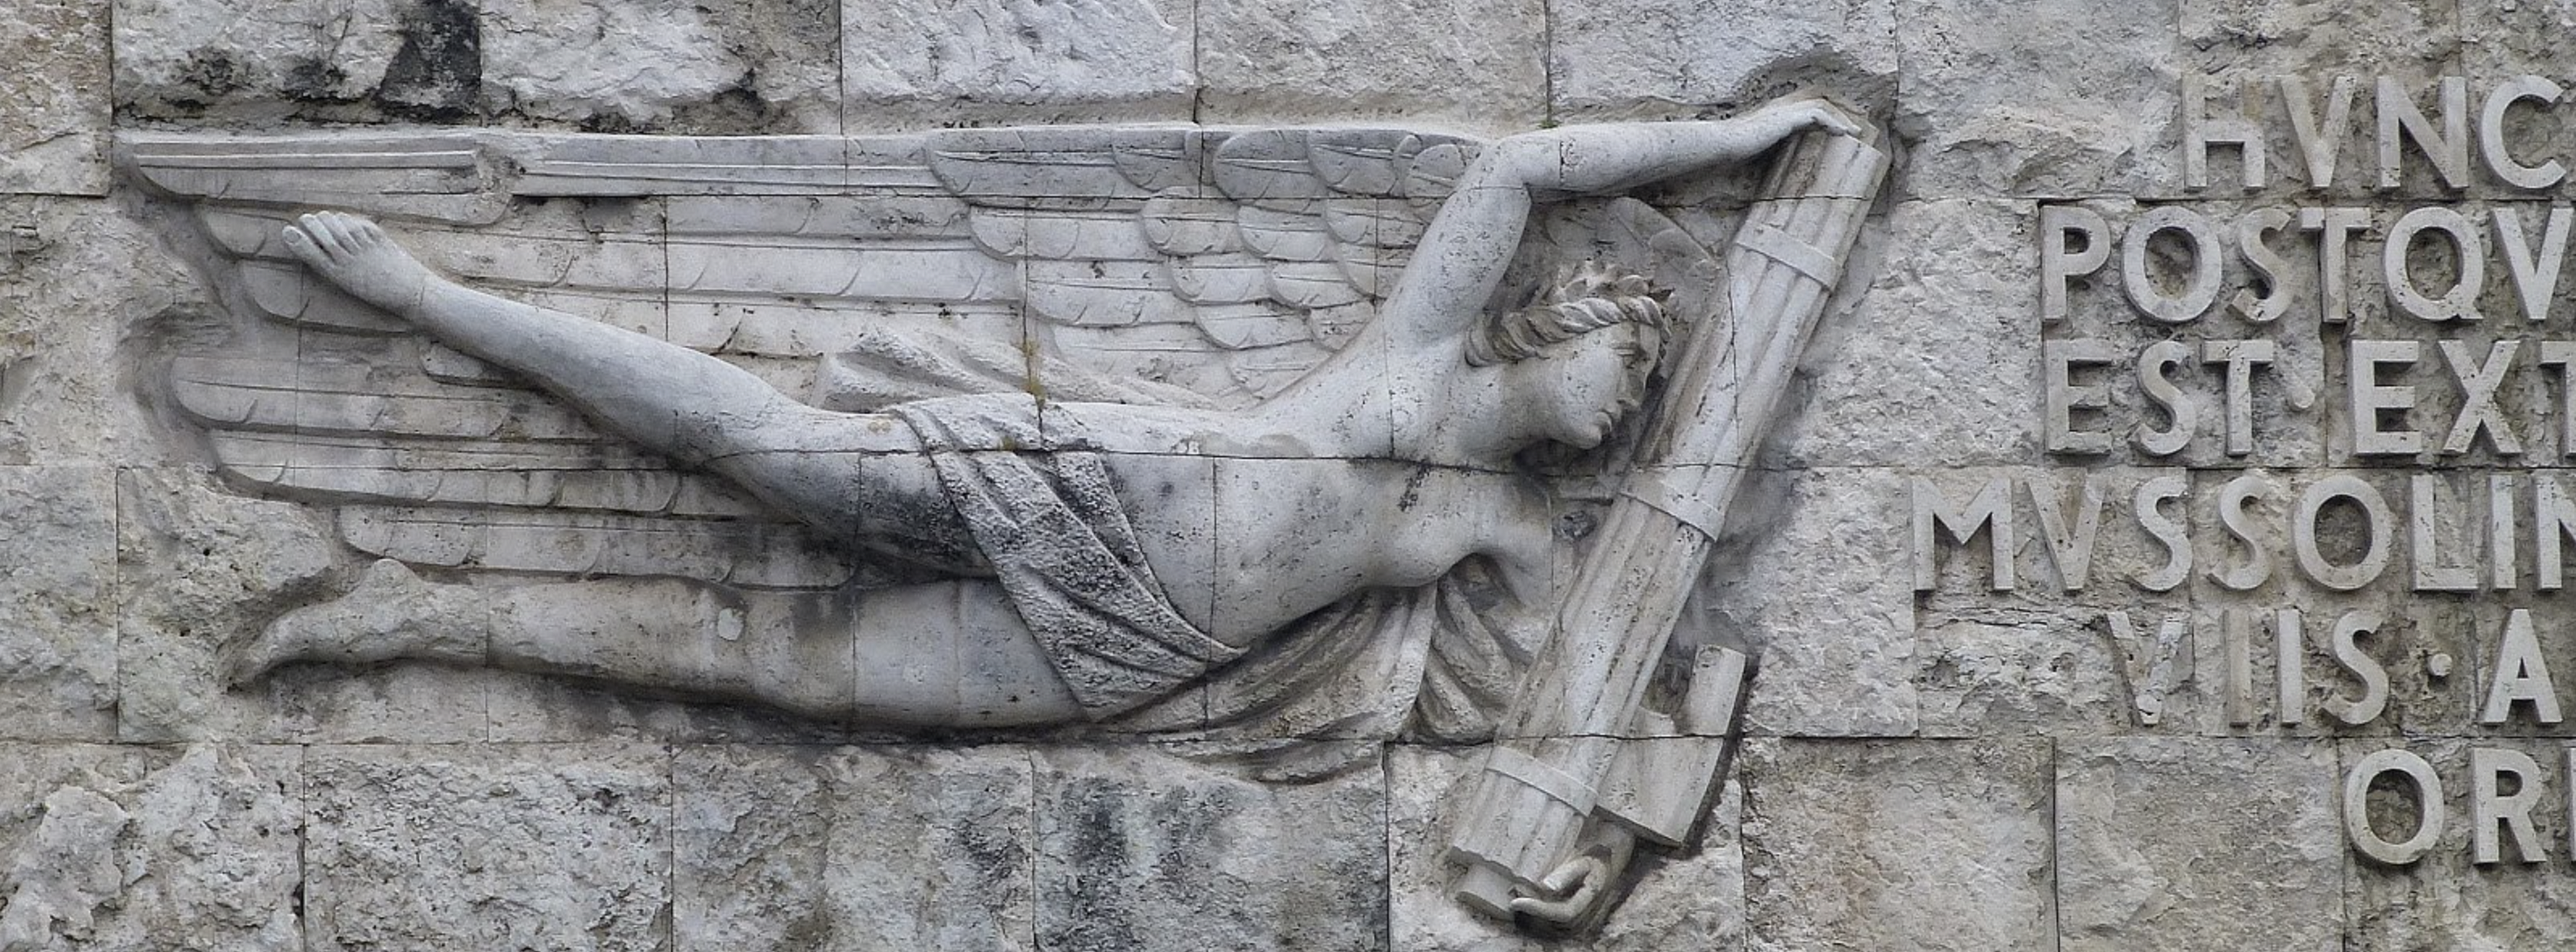 One of a pair of angels carrying a fasces, 1938, travertine relief, Istituto Nazionale Fascista Previdenza (photo: Martin G. Conde, FLICKR / RARA 2022 (11 June 2020)